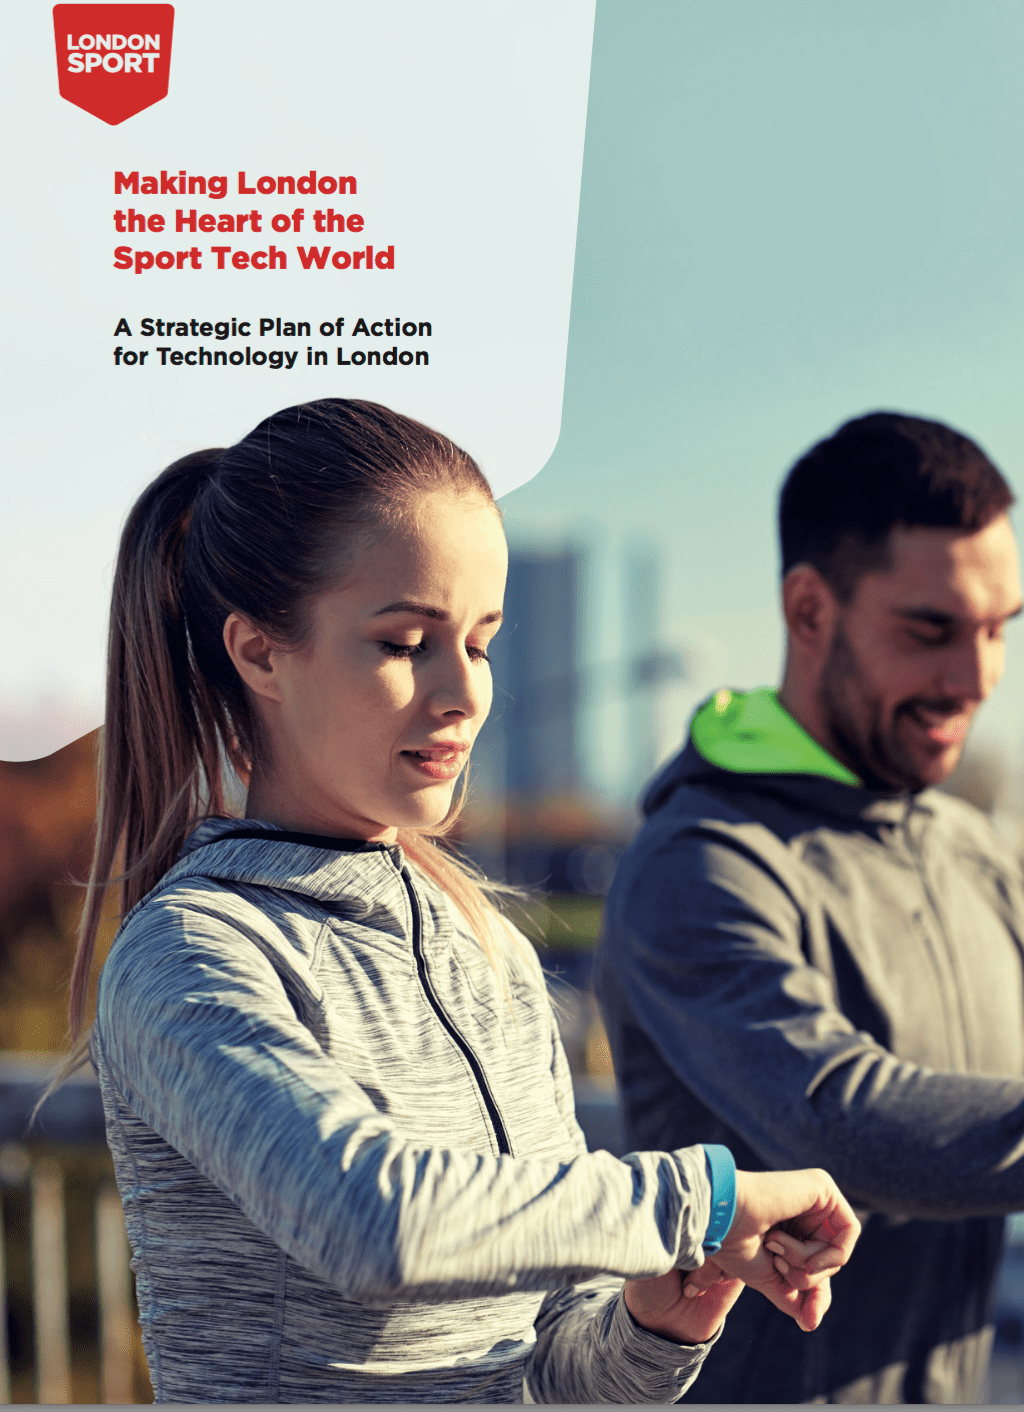 front cover of report showing two people looking at running watches